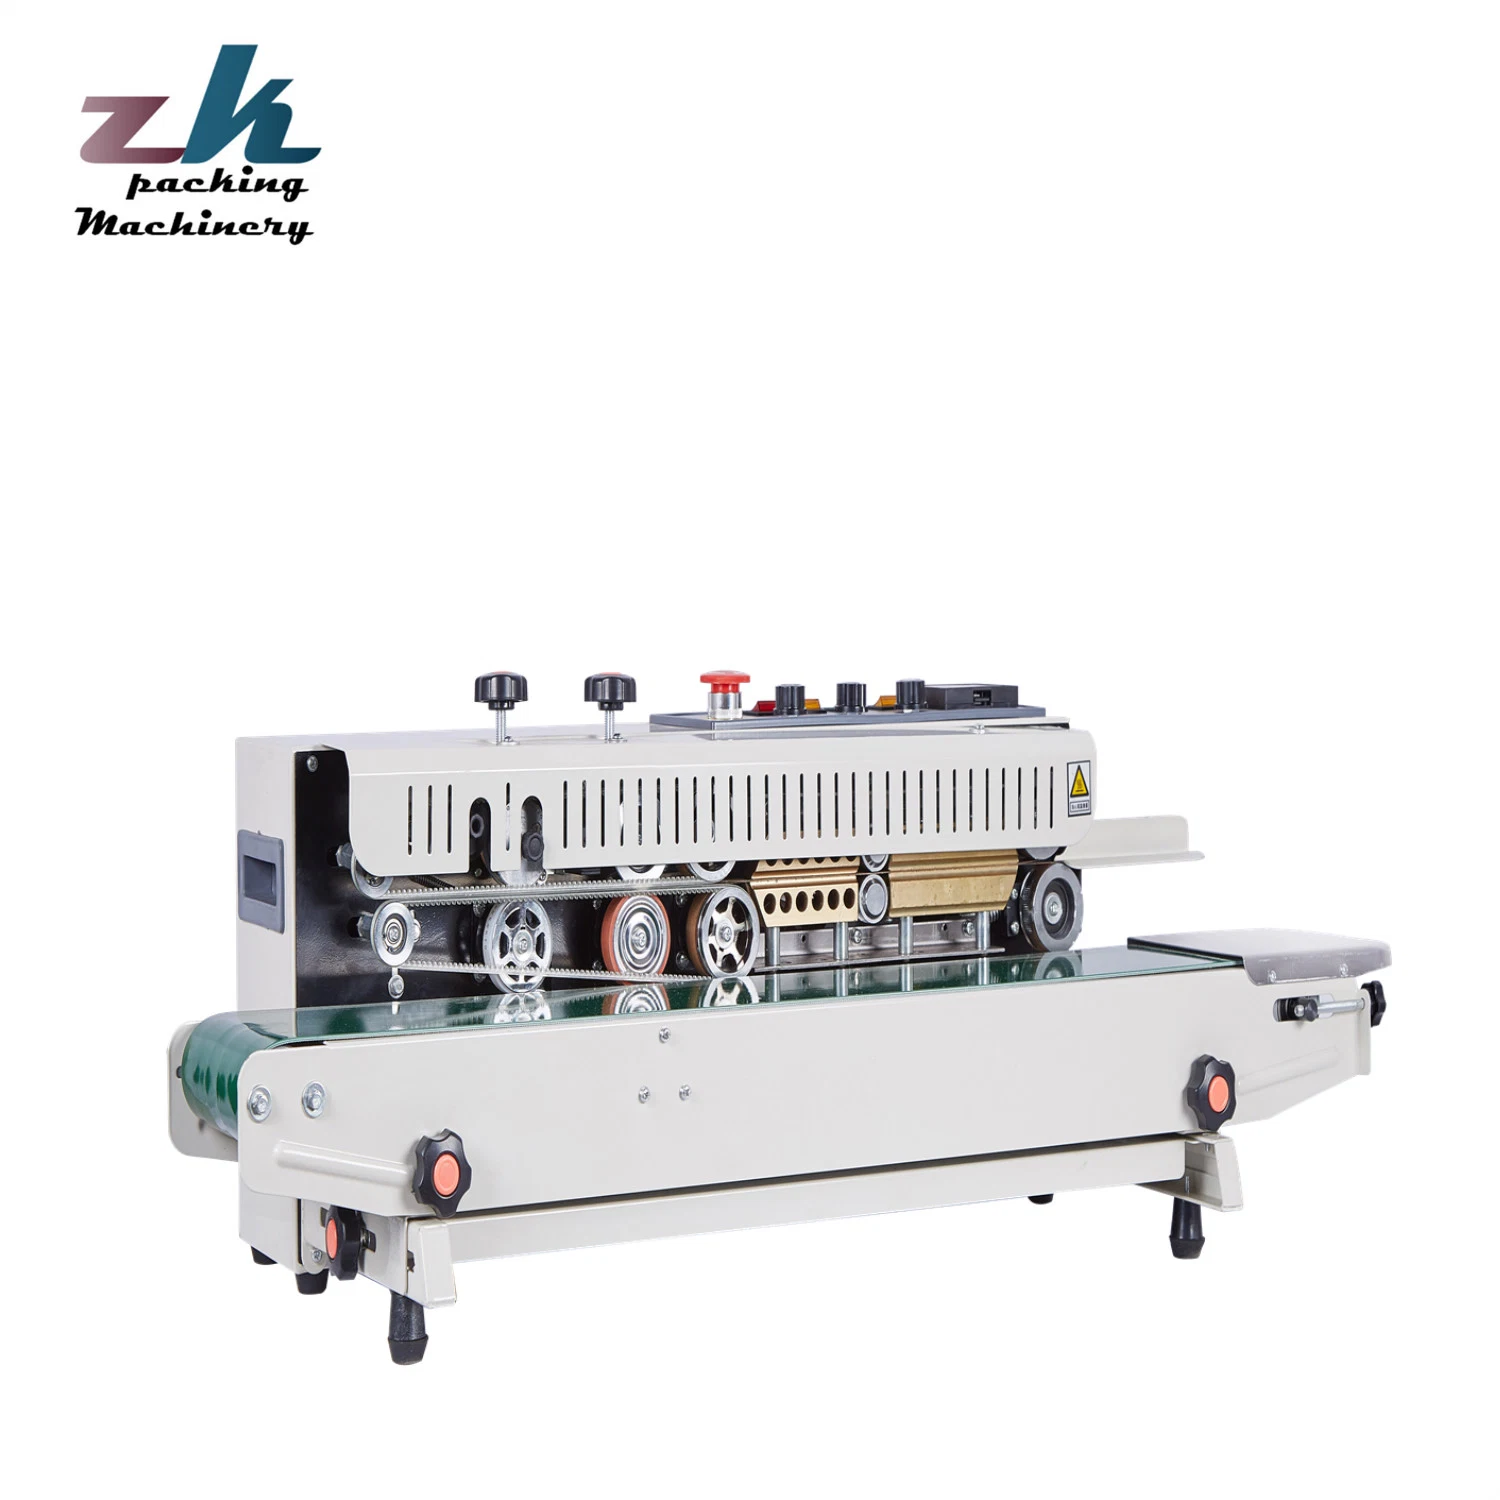 Plastic Bag Continuous Sealing Machine with Colored Ink Wheel Printing20% off